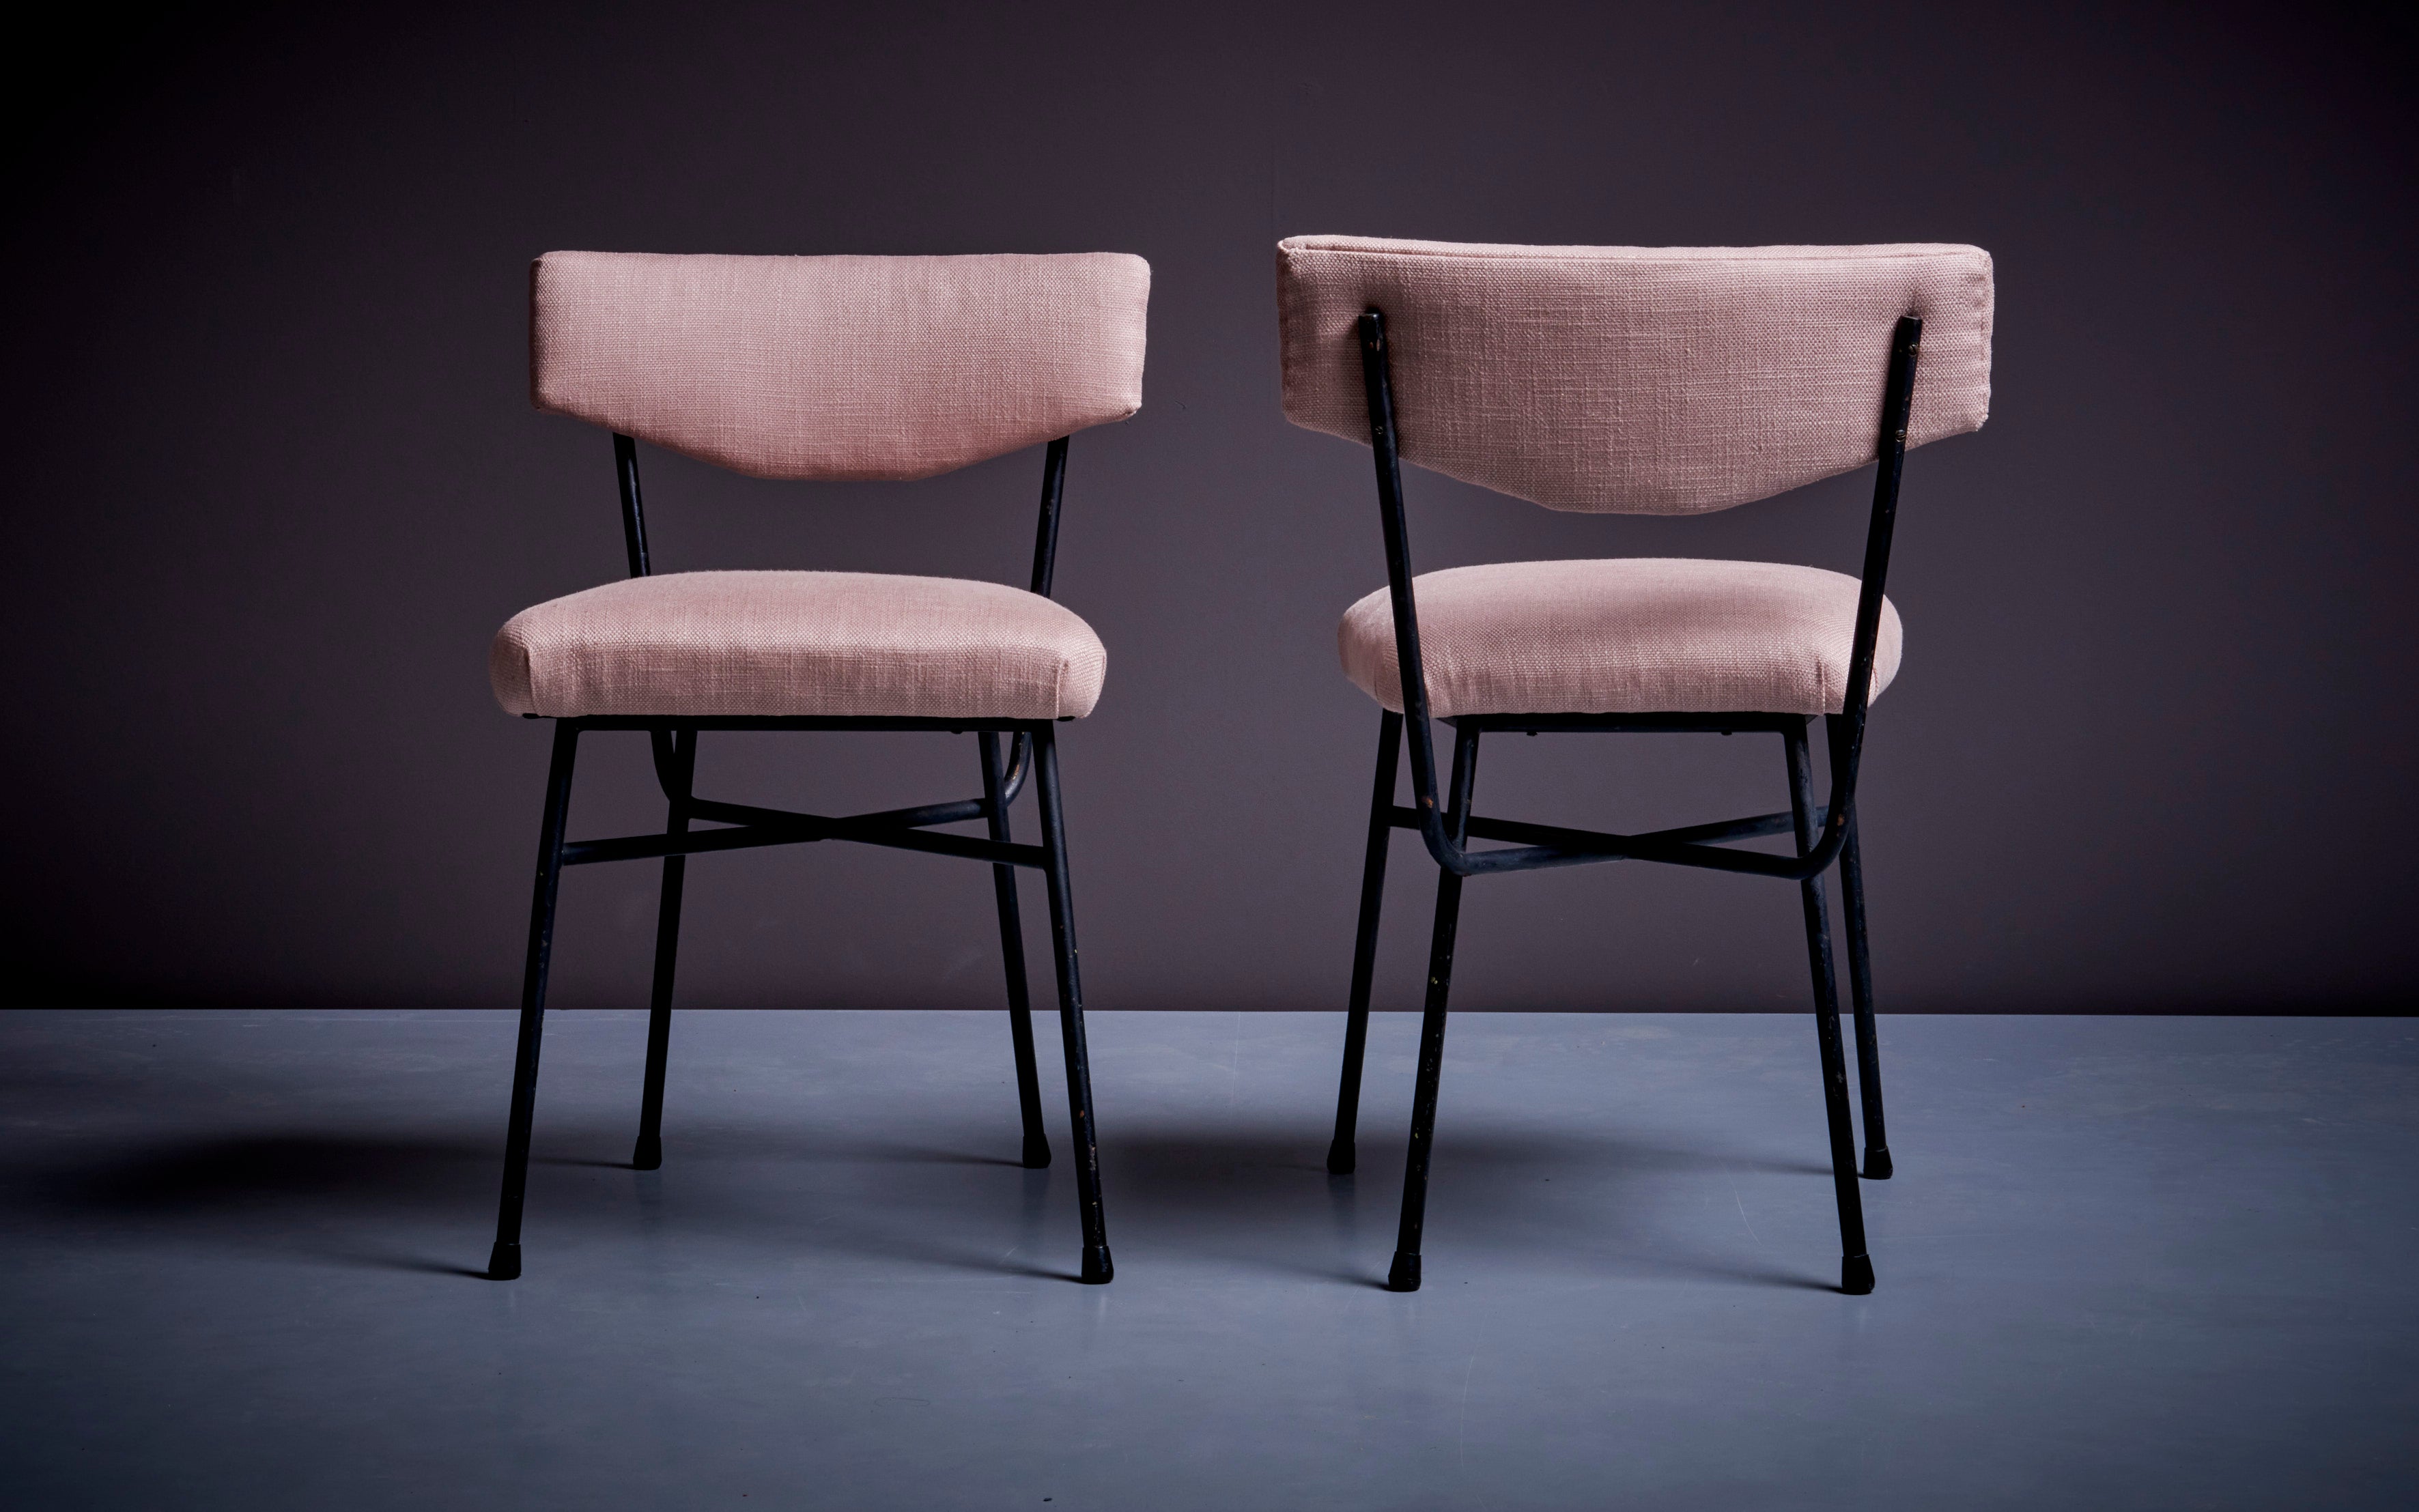 Iconic Elettra chair by Studio BBPR for Arflex with a black metal tubular base which is intersected below the seat. The seats are covered with a newly upholstered light pink fabric.

The Elettra chair is a modernist chair designed by Italian